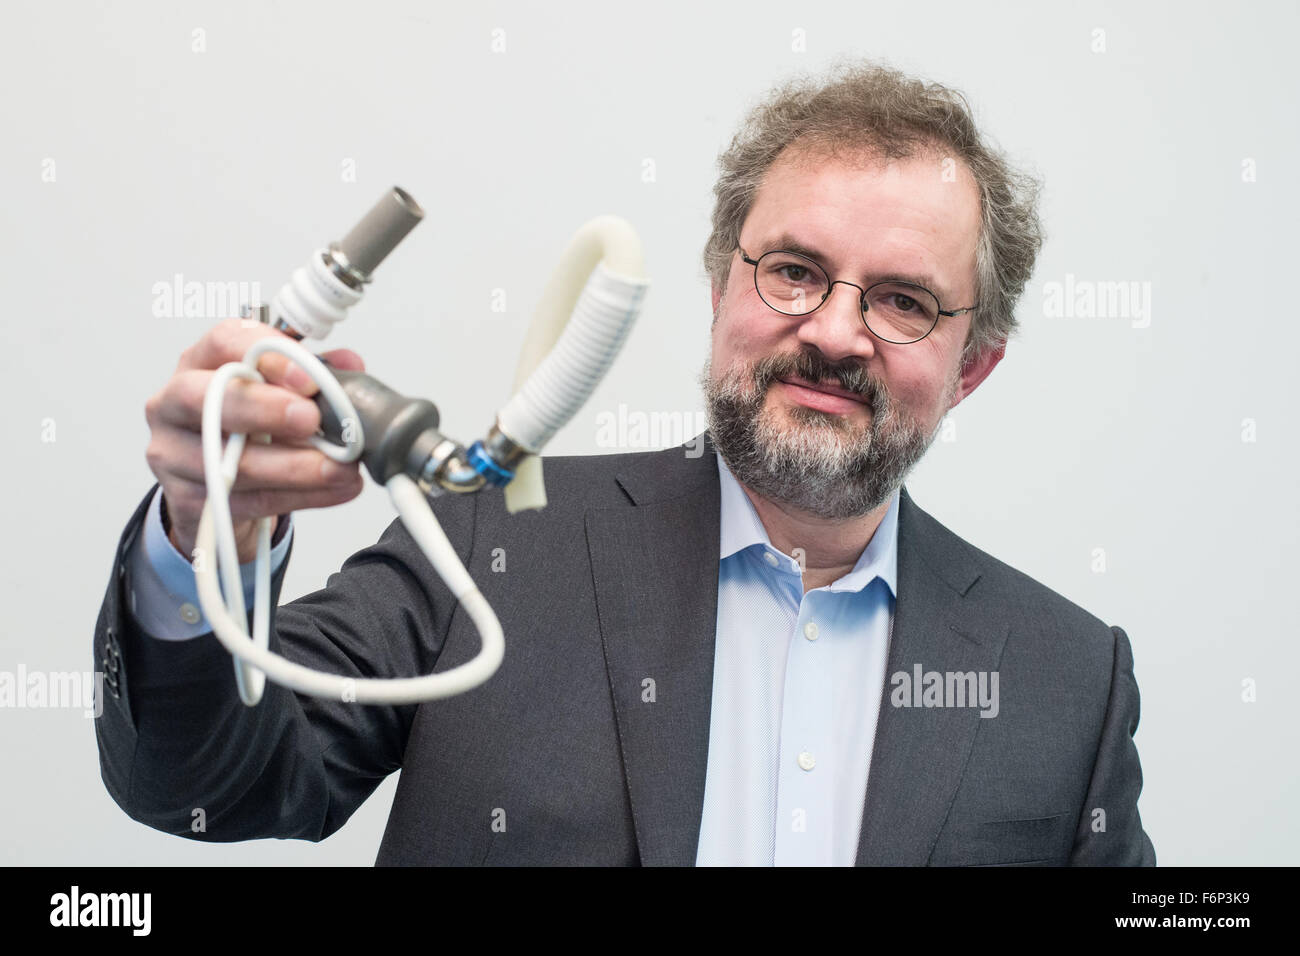 Martin Strueber from the Heart and Lung clinic at Michigan State University at a press conference in the Medical School (MHH) in Hannover (Lower Saxony), holding the ventricular assist device, 'HeartMate II' in his hand, Hannover, Germany, 18 November 2015. Strueber had installed the device inside patient Schulze in 2005 who has lived for ten years with the artificial heart, he is a according to the MHH the European record holder. Photo: OLE SPATA/dpa Stock Photo